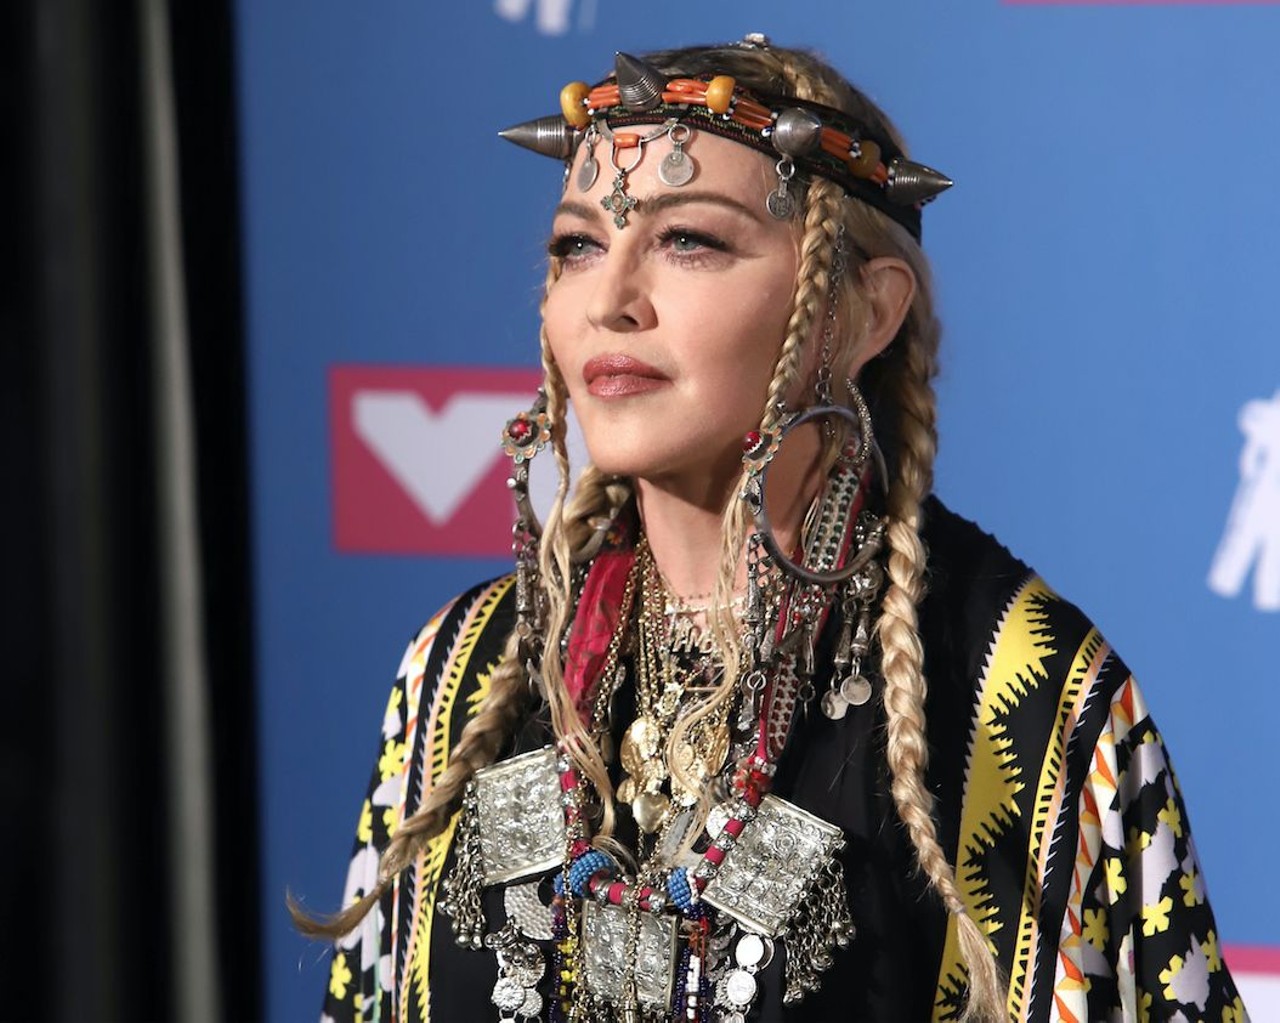 Madonna 
Bow down to the &#147;Queen of Pop!&#148; This singer, songwriter, actress, and businesswoman is known for pushing boundaries onstage and in music videos. She has been at the top of her game since the &#145;80s, has sold more than 300 million records worldwide, and continues to influence other artists. &nbsp;
JStone / Shutterstock